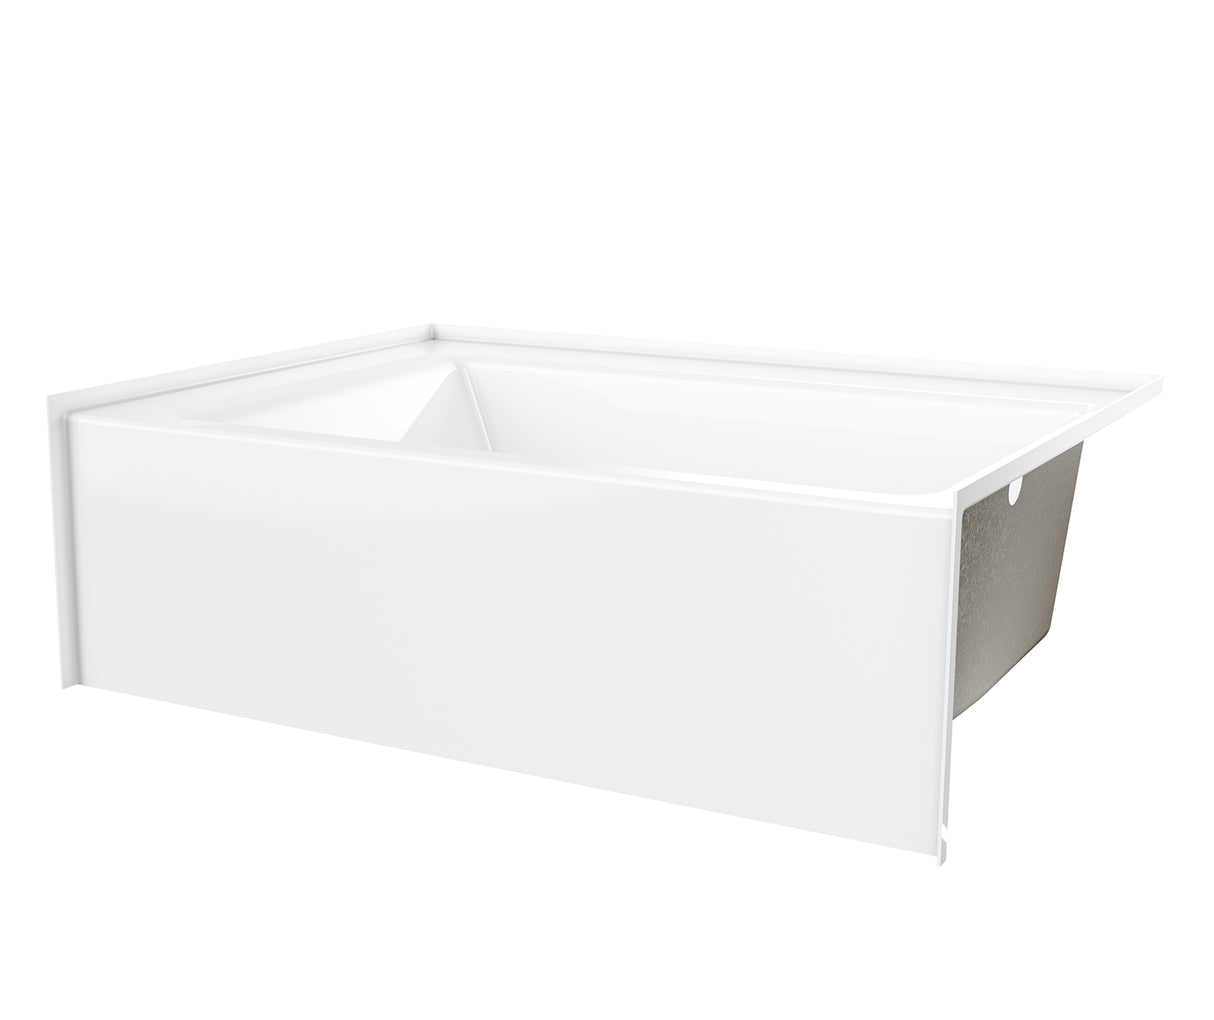 Aker SMIN-4260 AFR AcrylX Alcove Left-Hand Drain Bath in Biscuit